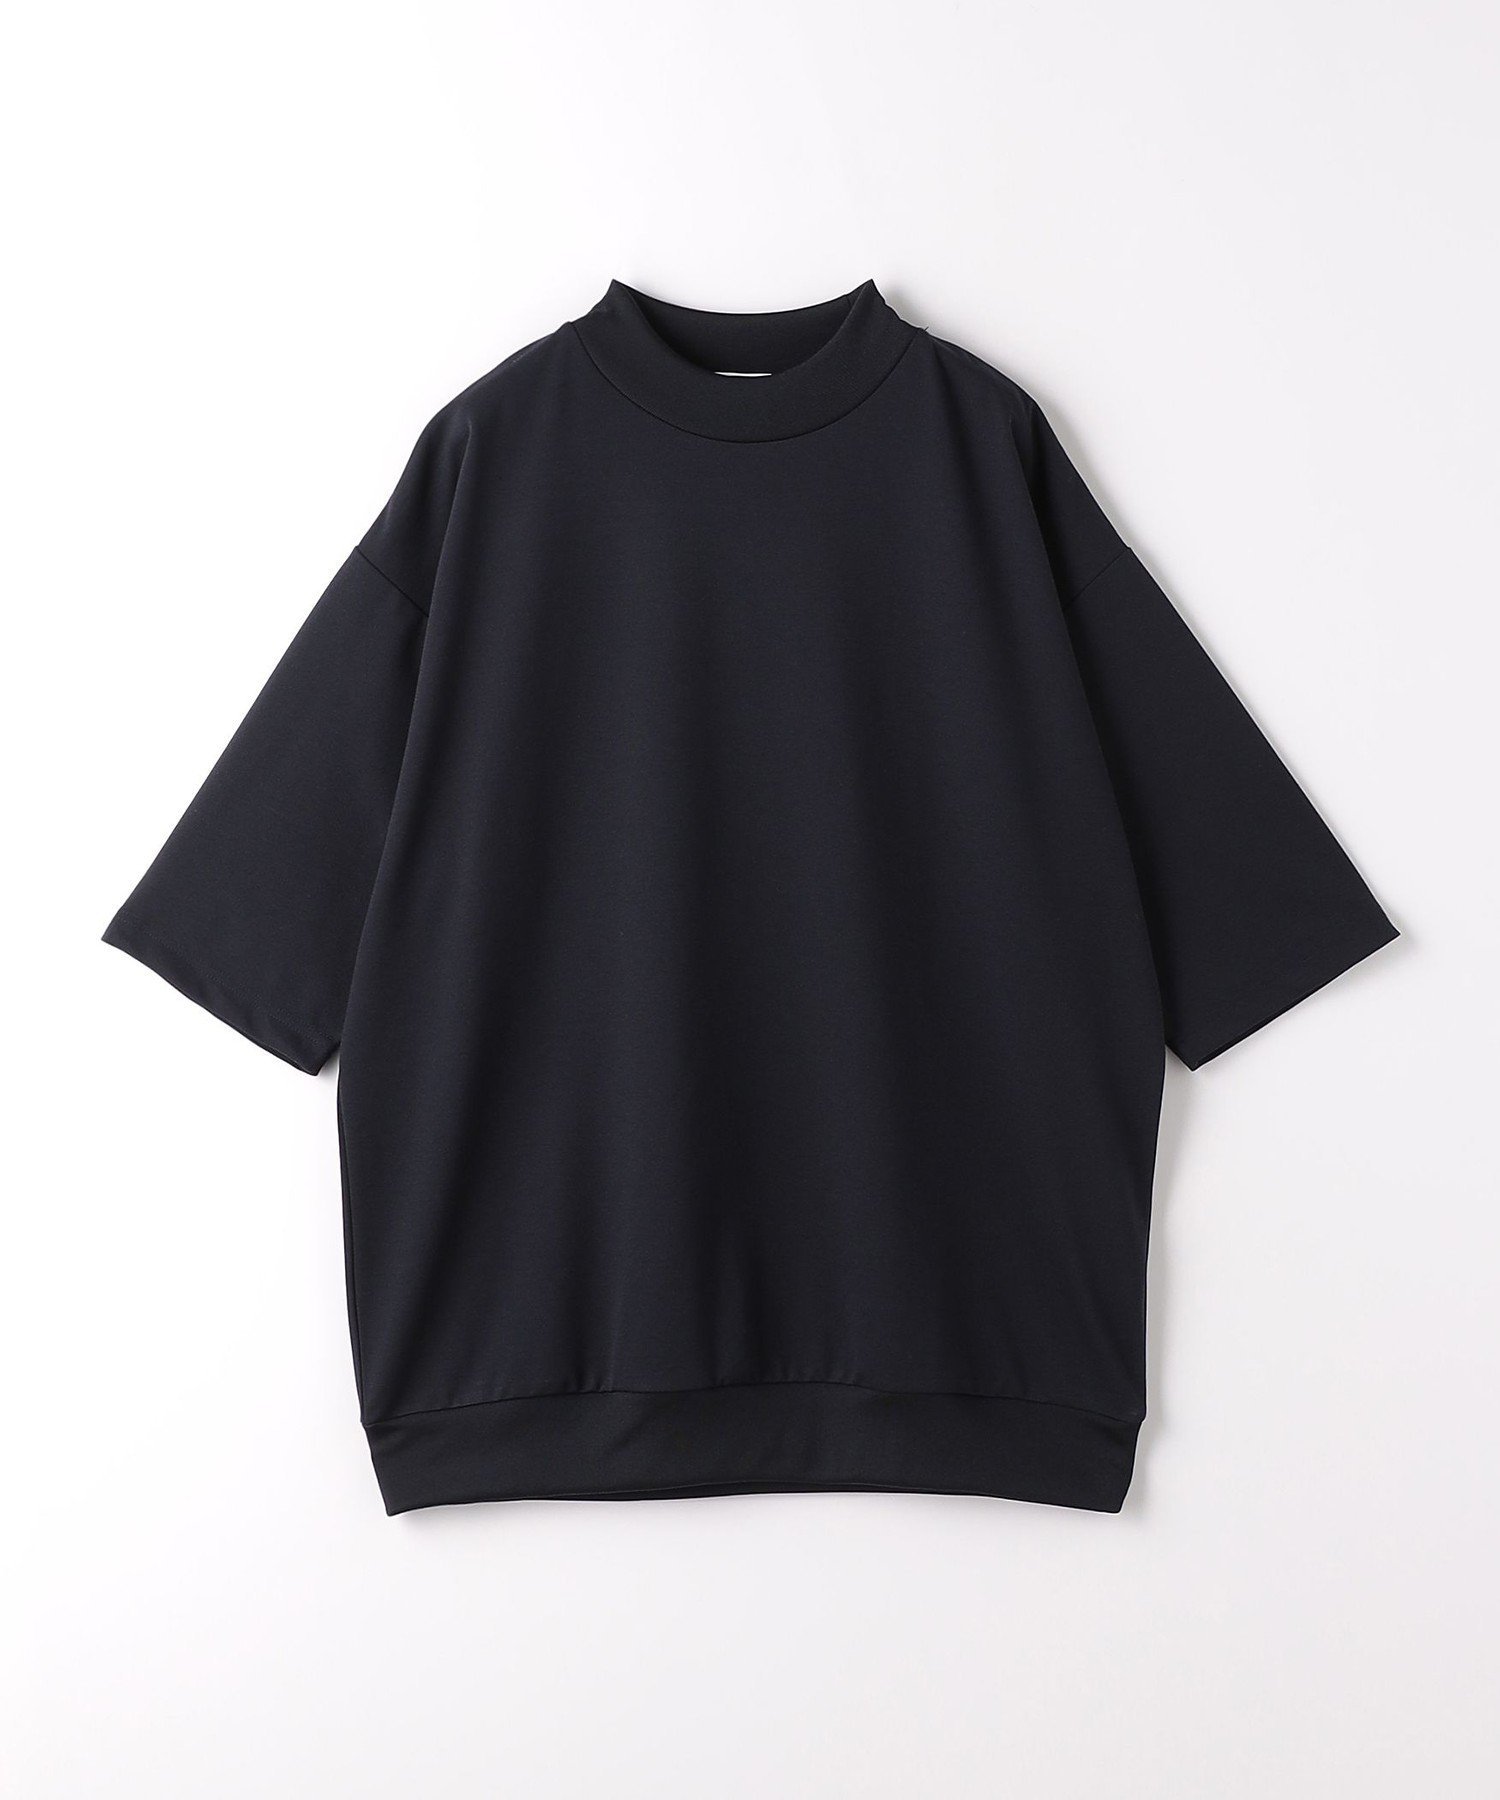 a day in the life ポンチ リラックス モックネックカットソー＜A DAY IN THE LIFE＞ ユナイテッドアローズ アウトレット トップス カットソー・Tシャツ ネイビー ホワイト ブラック